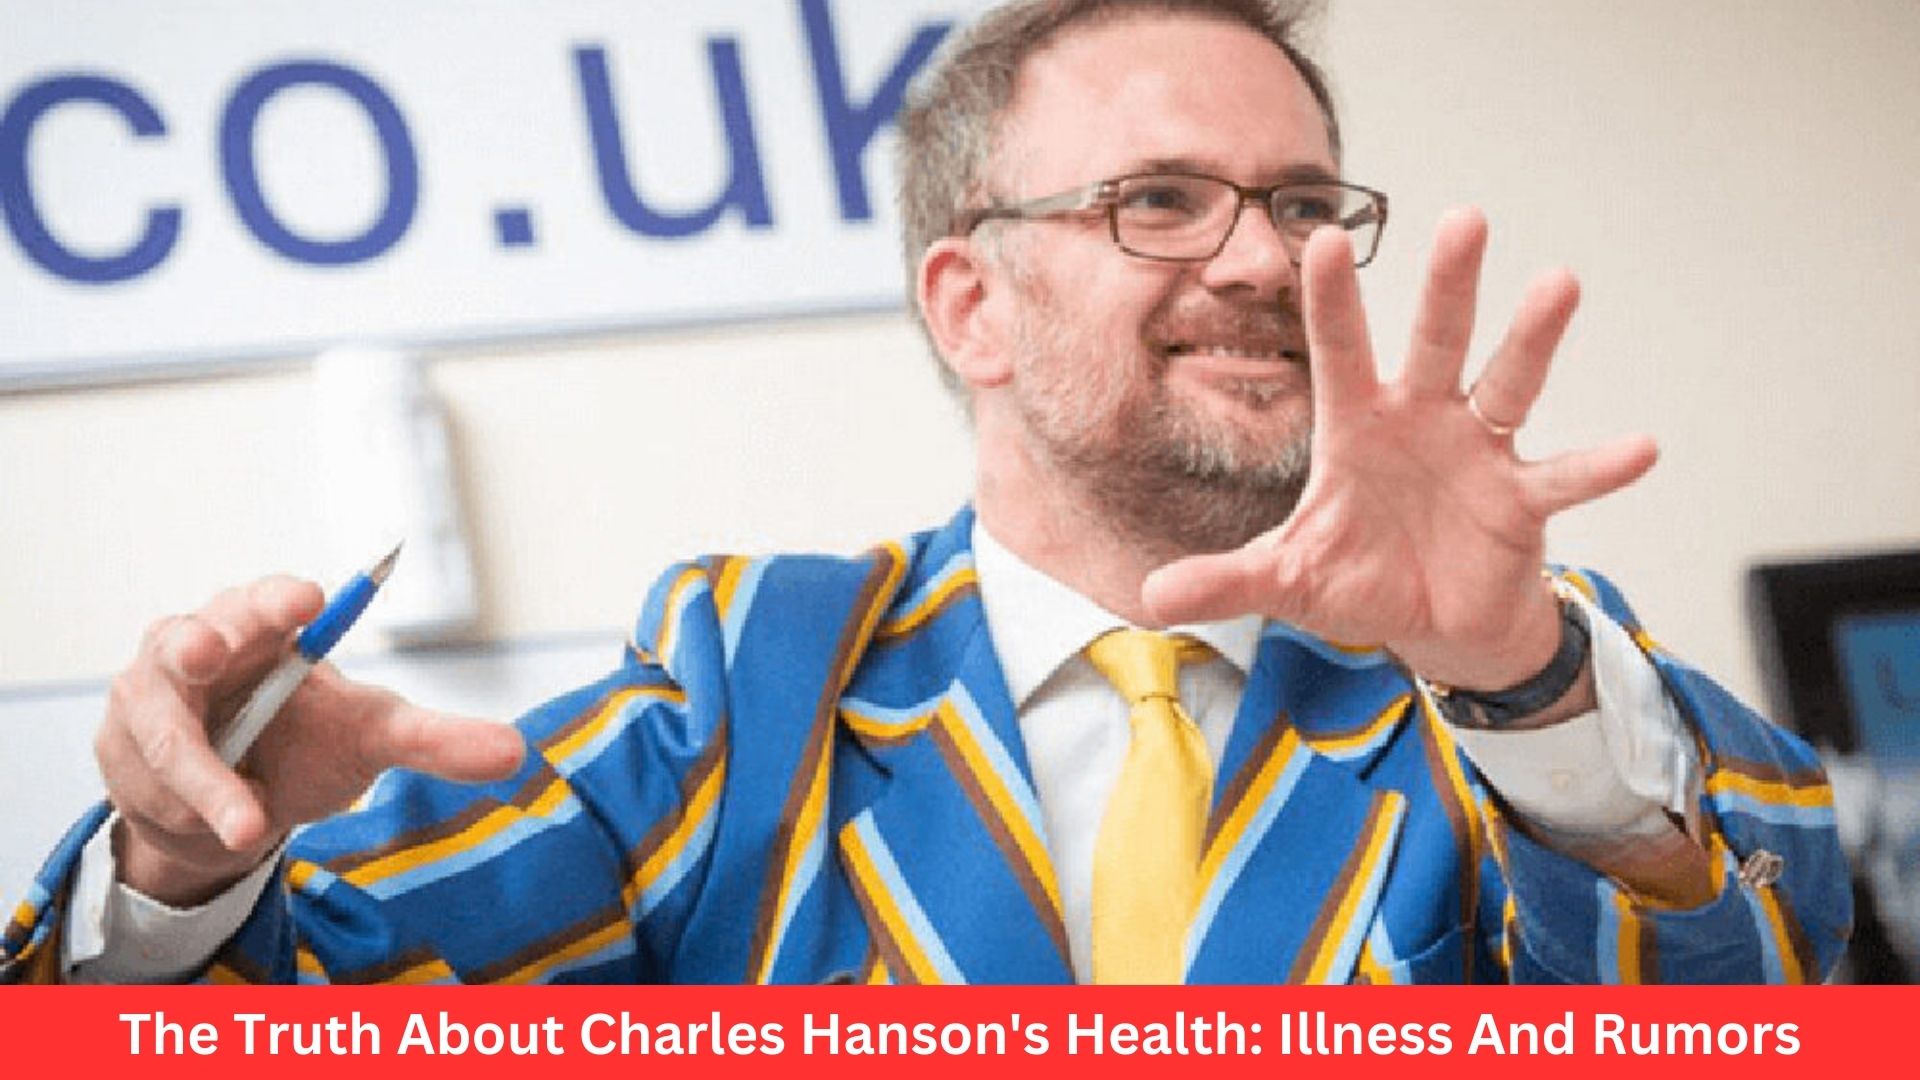 The Truth About Charles Hanson's Health: Illness And Rumors